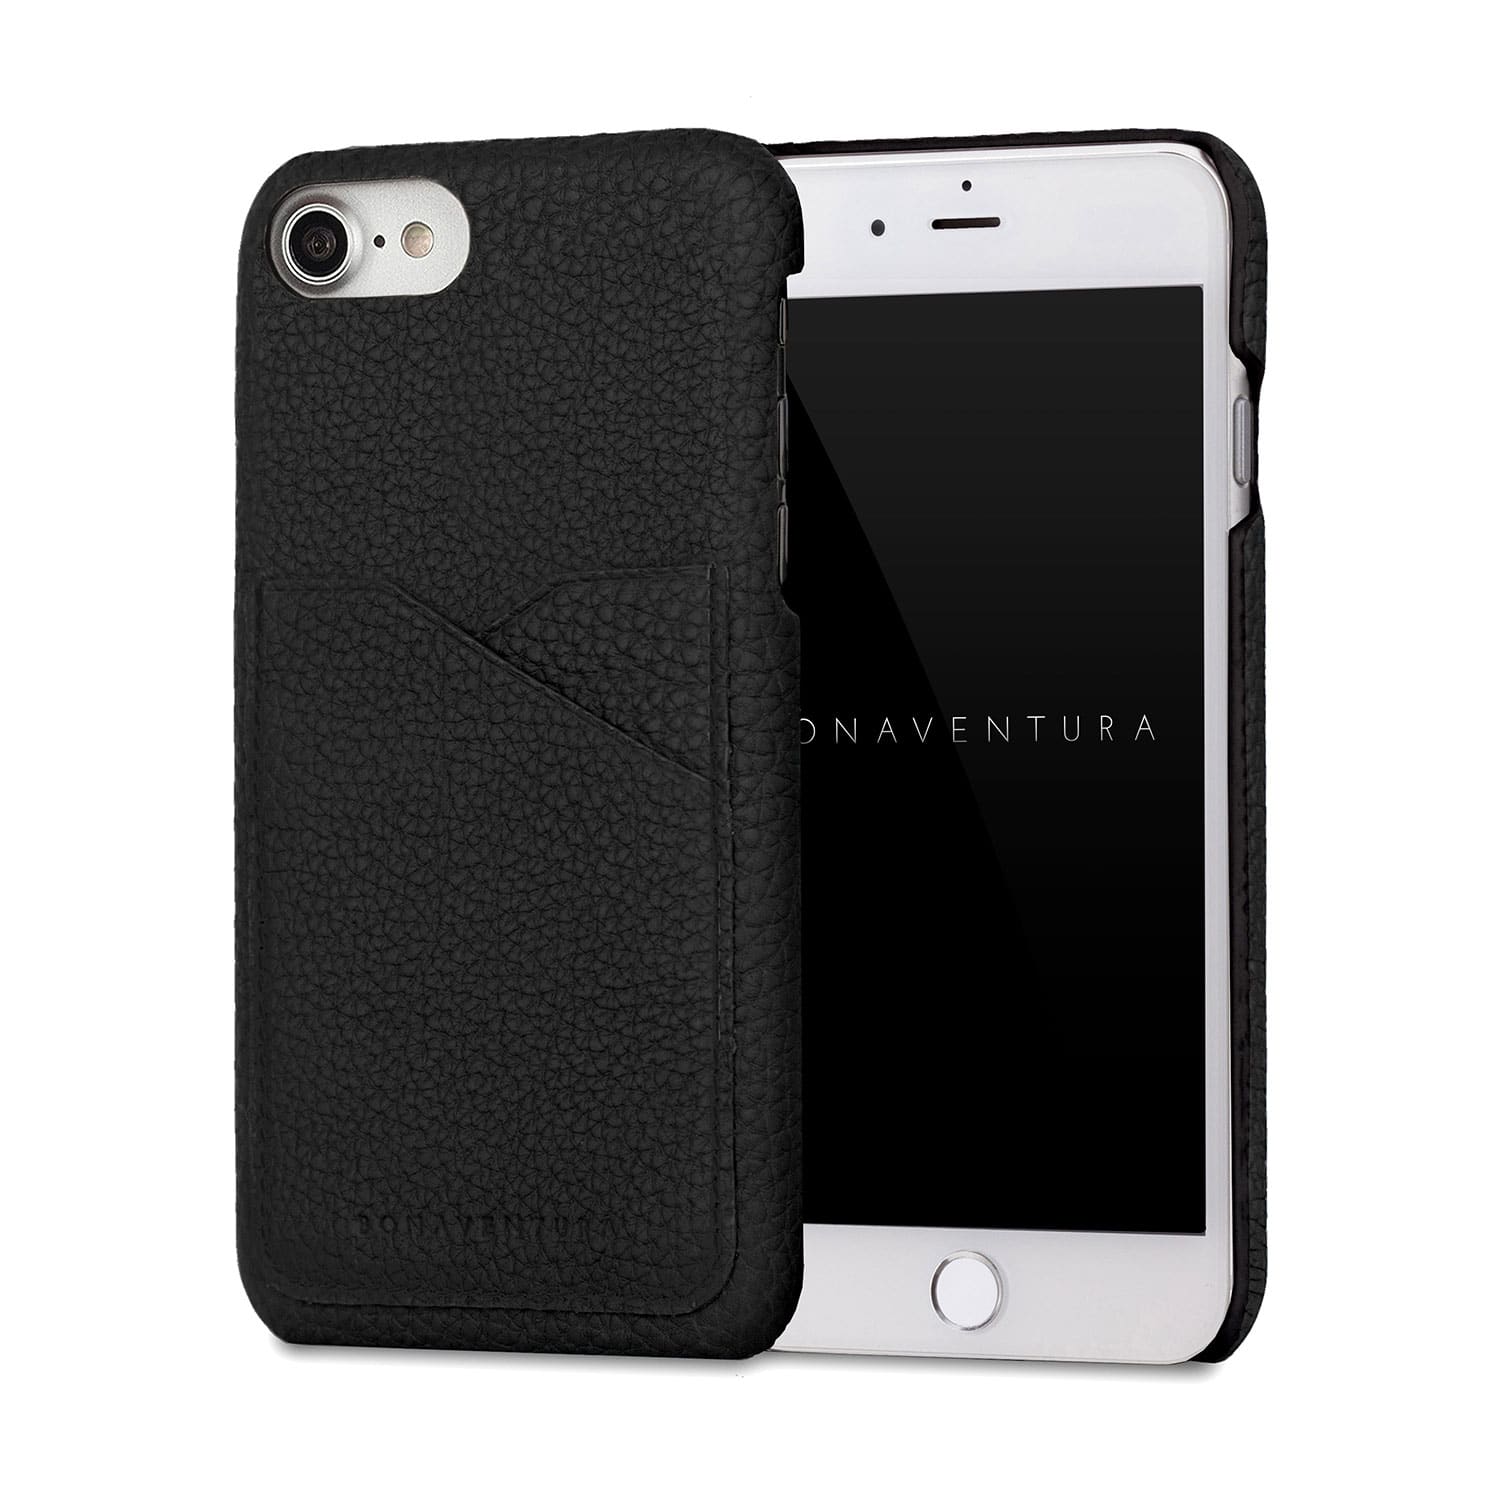 (iPhone SE / 8 / 7 / 6s / 6) Back Cover Case Shrink Leather